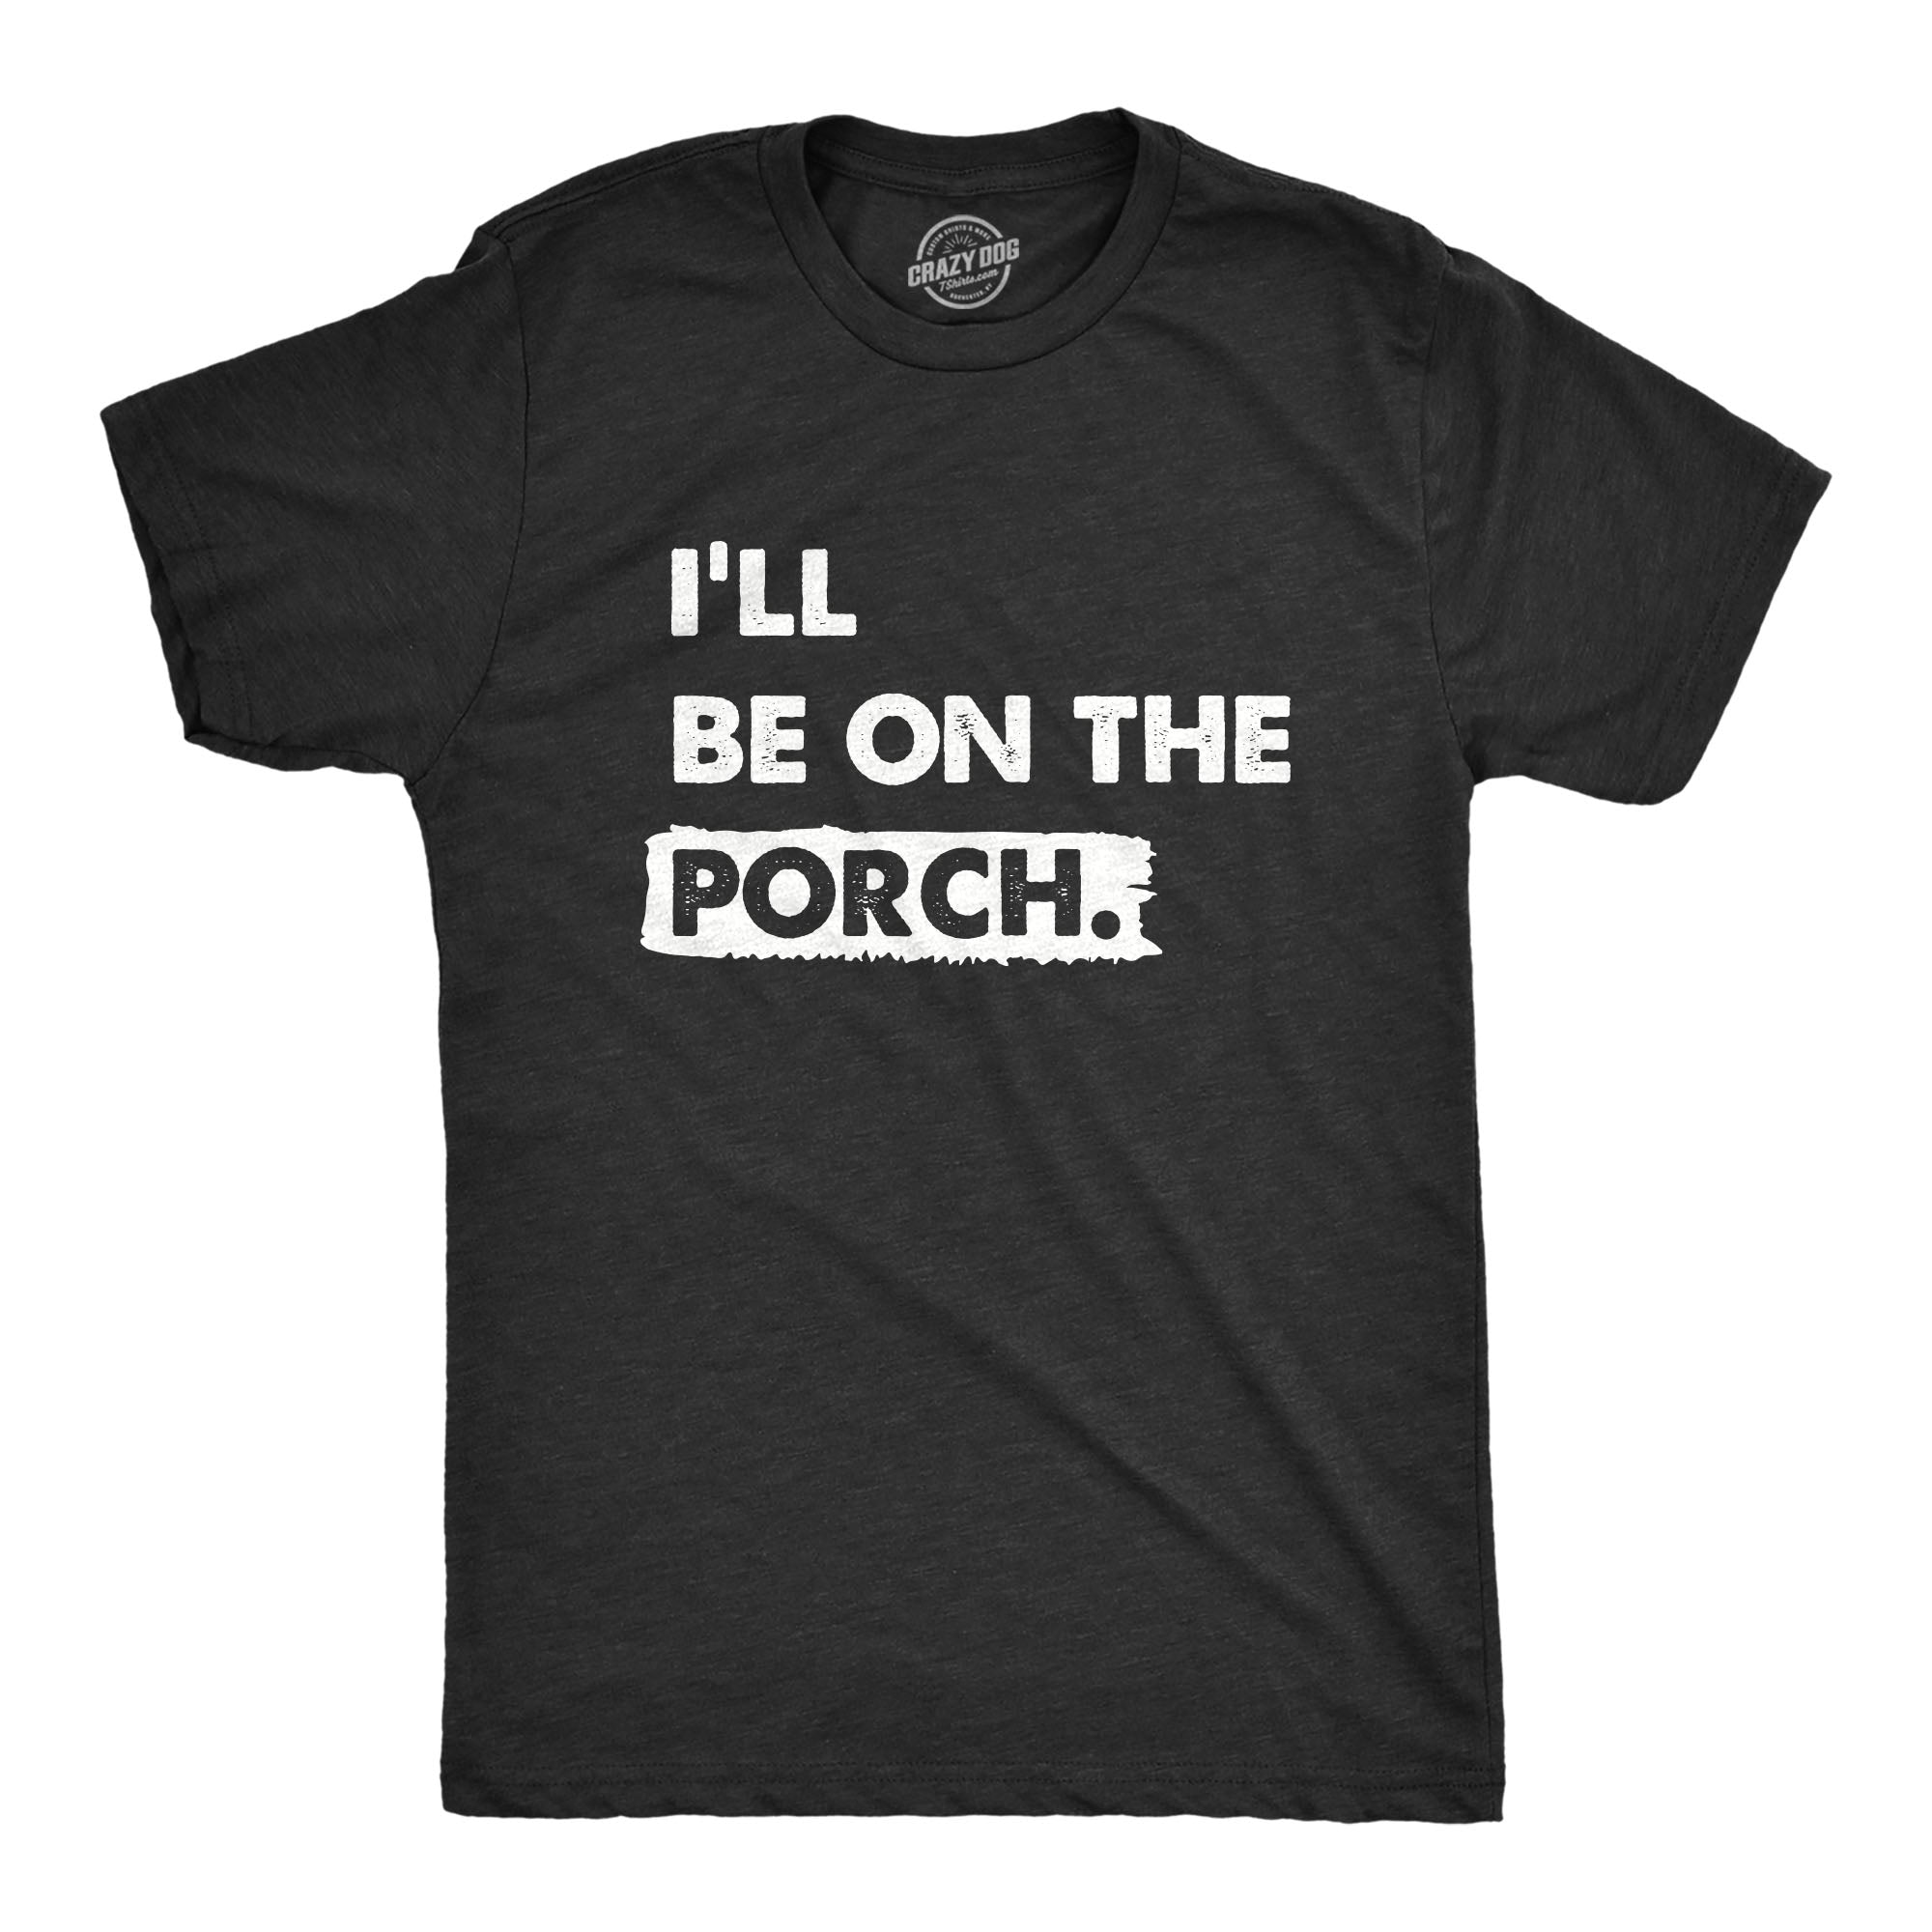 Funny Heather Black - PORCH Ill Be on the Porch Mens T Shirt Nerdy Sarcastic Tee